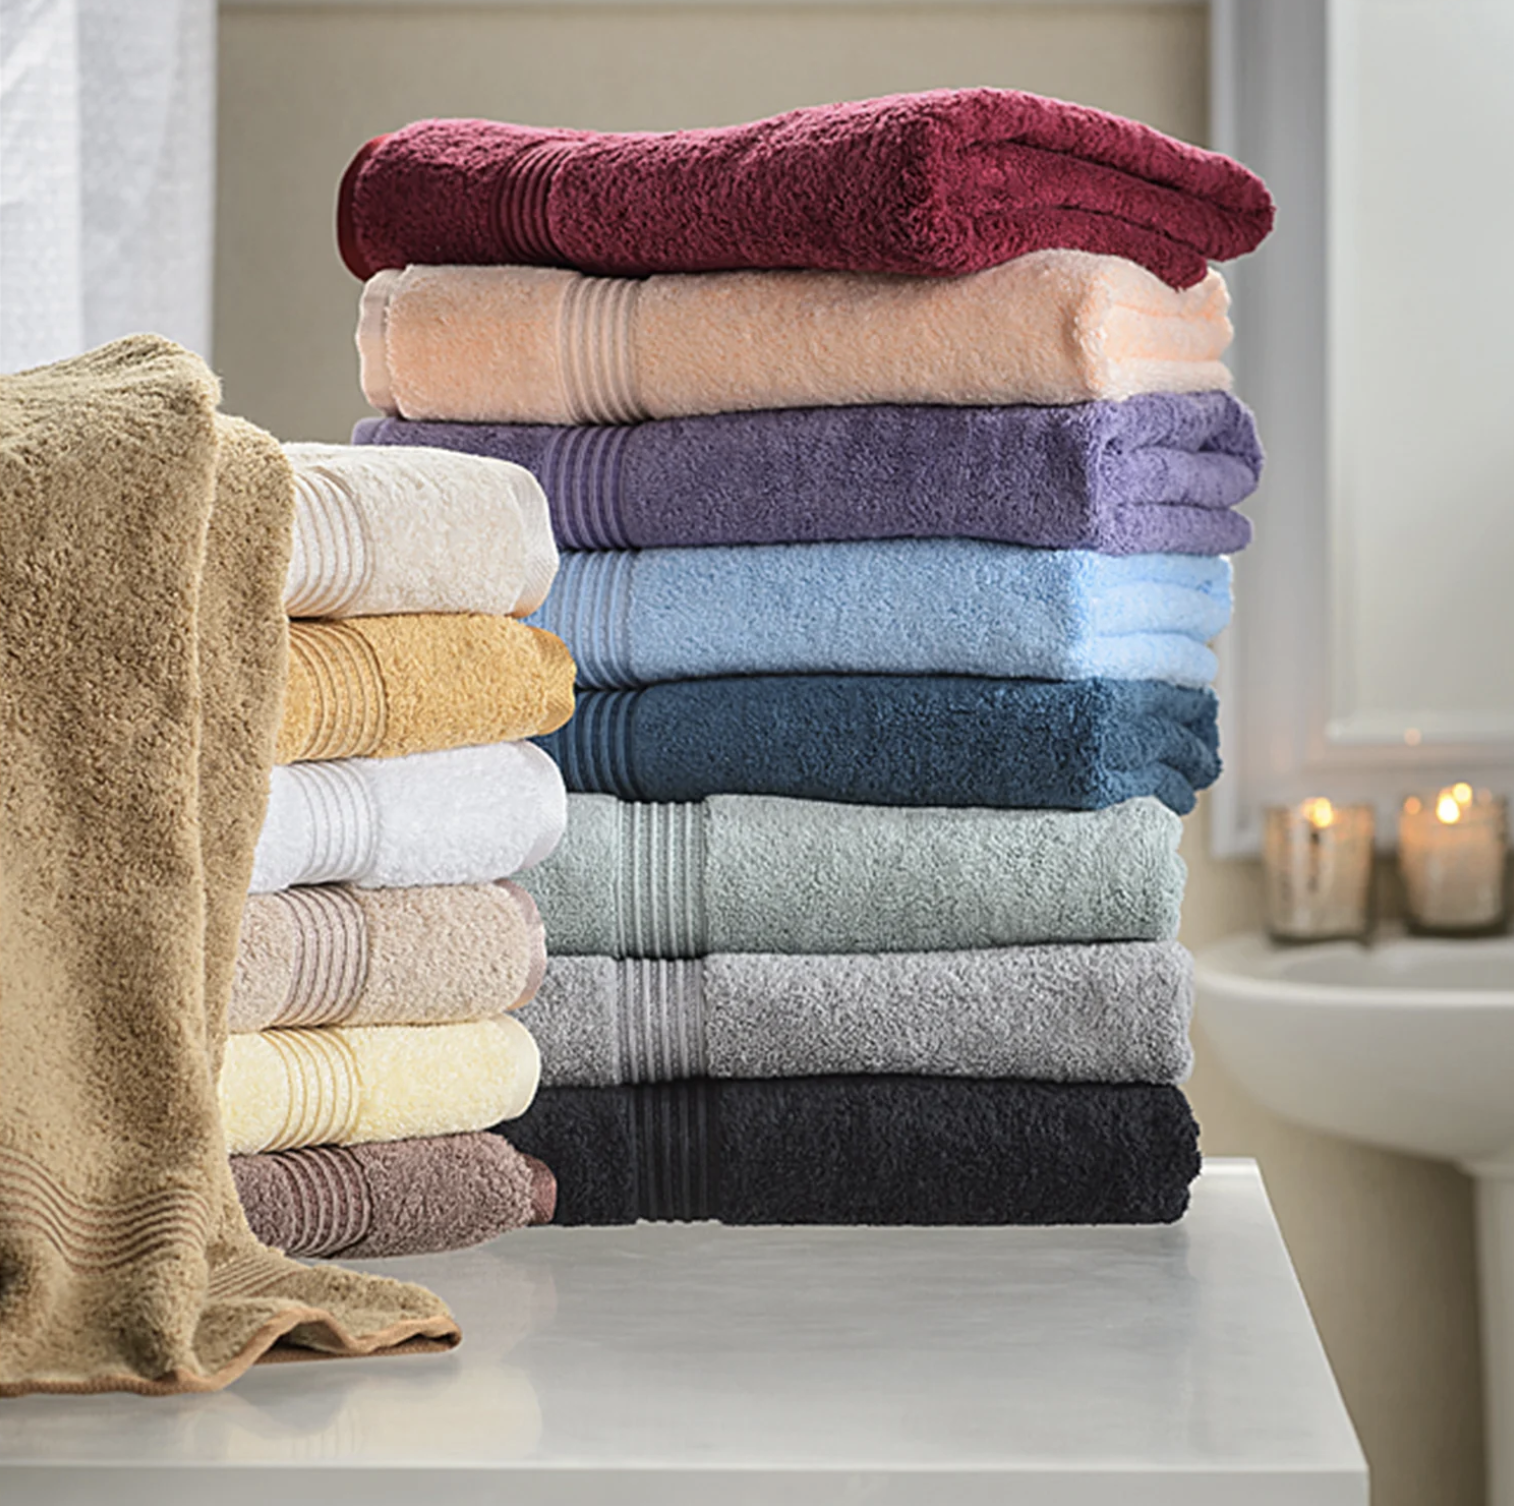 the towels in different colors stacked on a counter